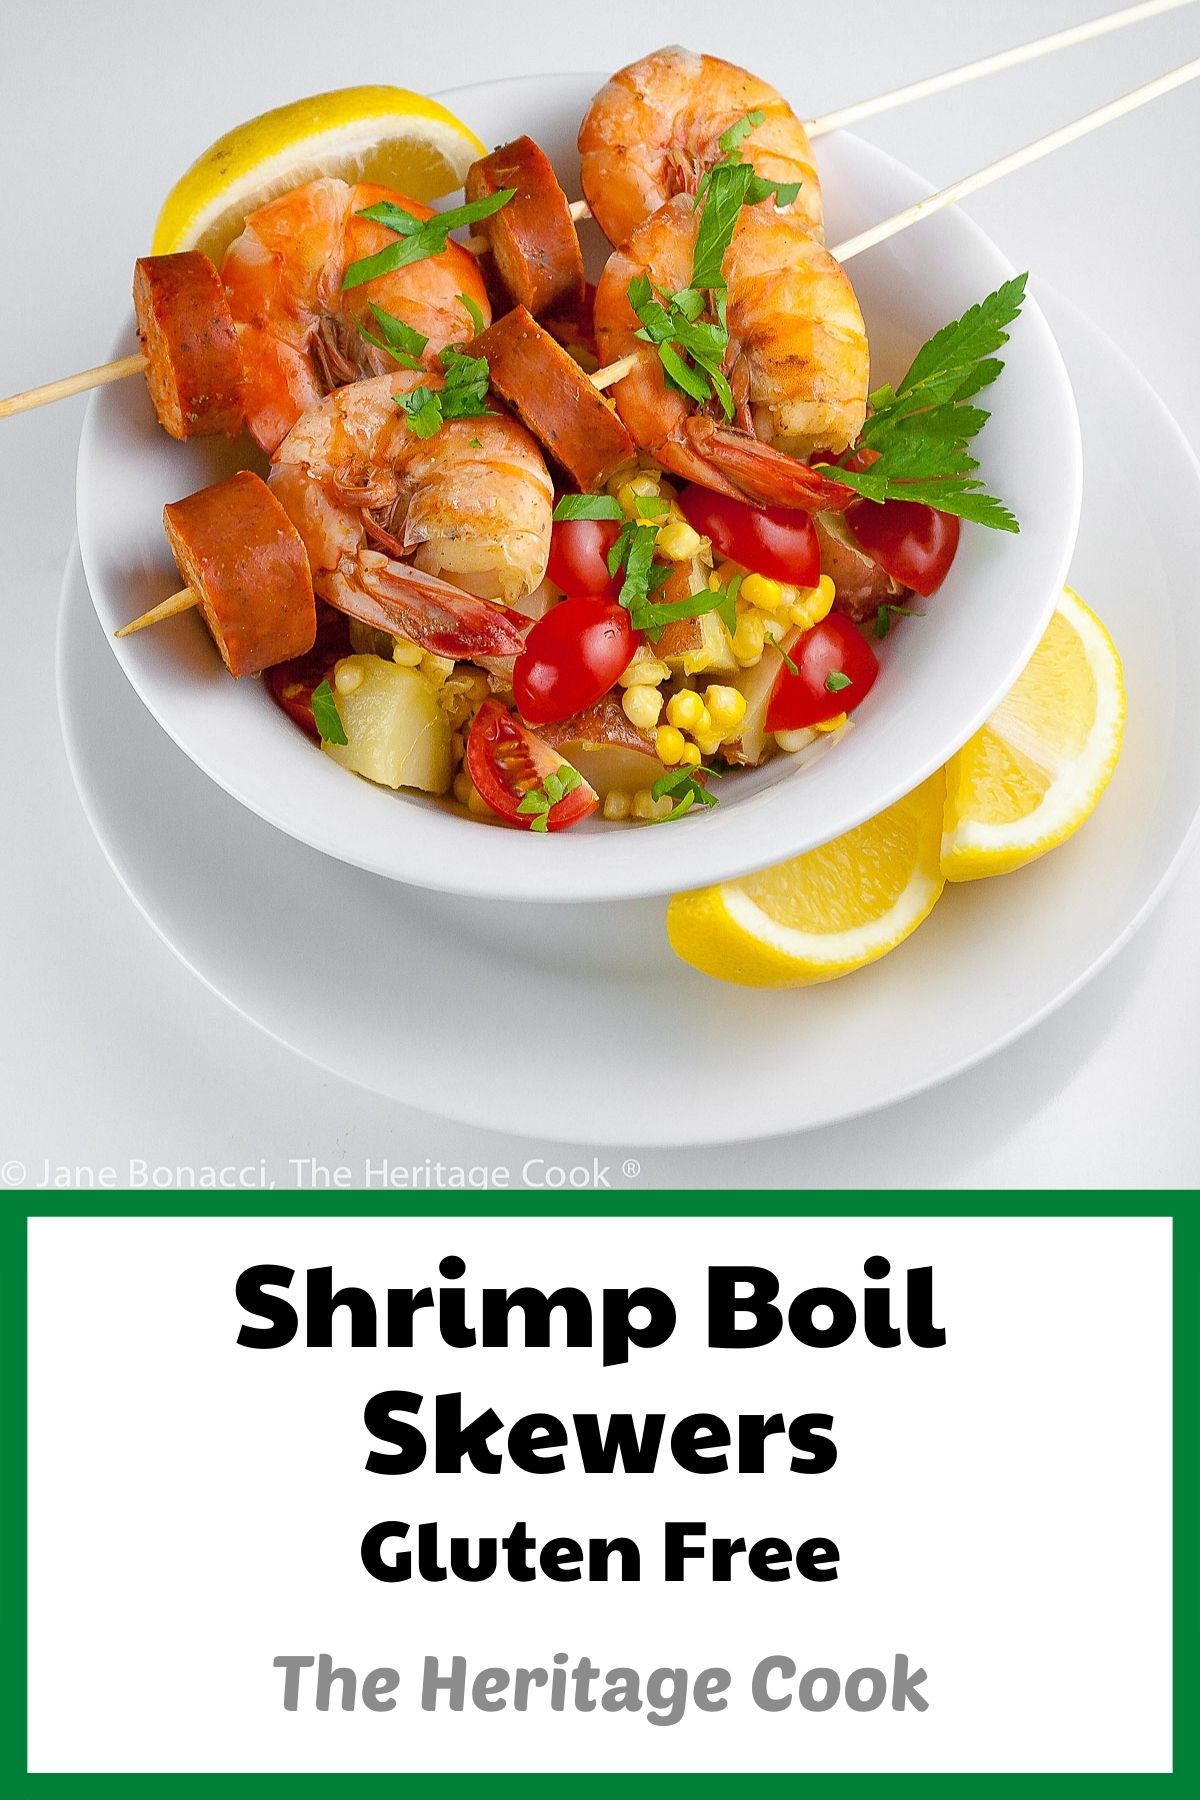 Bowl with fresh corn, potatoes and tomatoes topped by Shrimp Boil Skewers © 2022 Jane Bonacci, The Heritage Cook